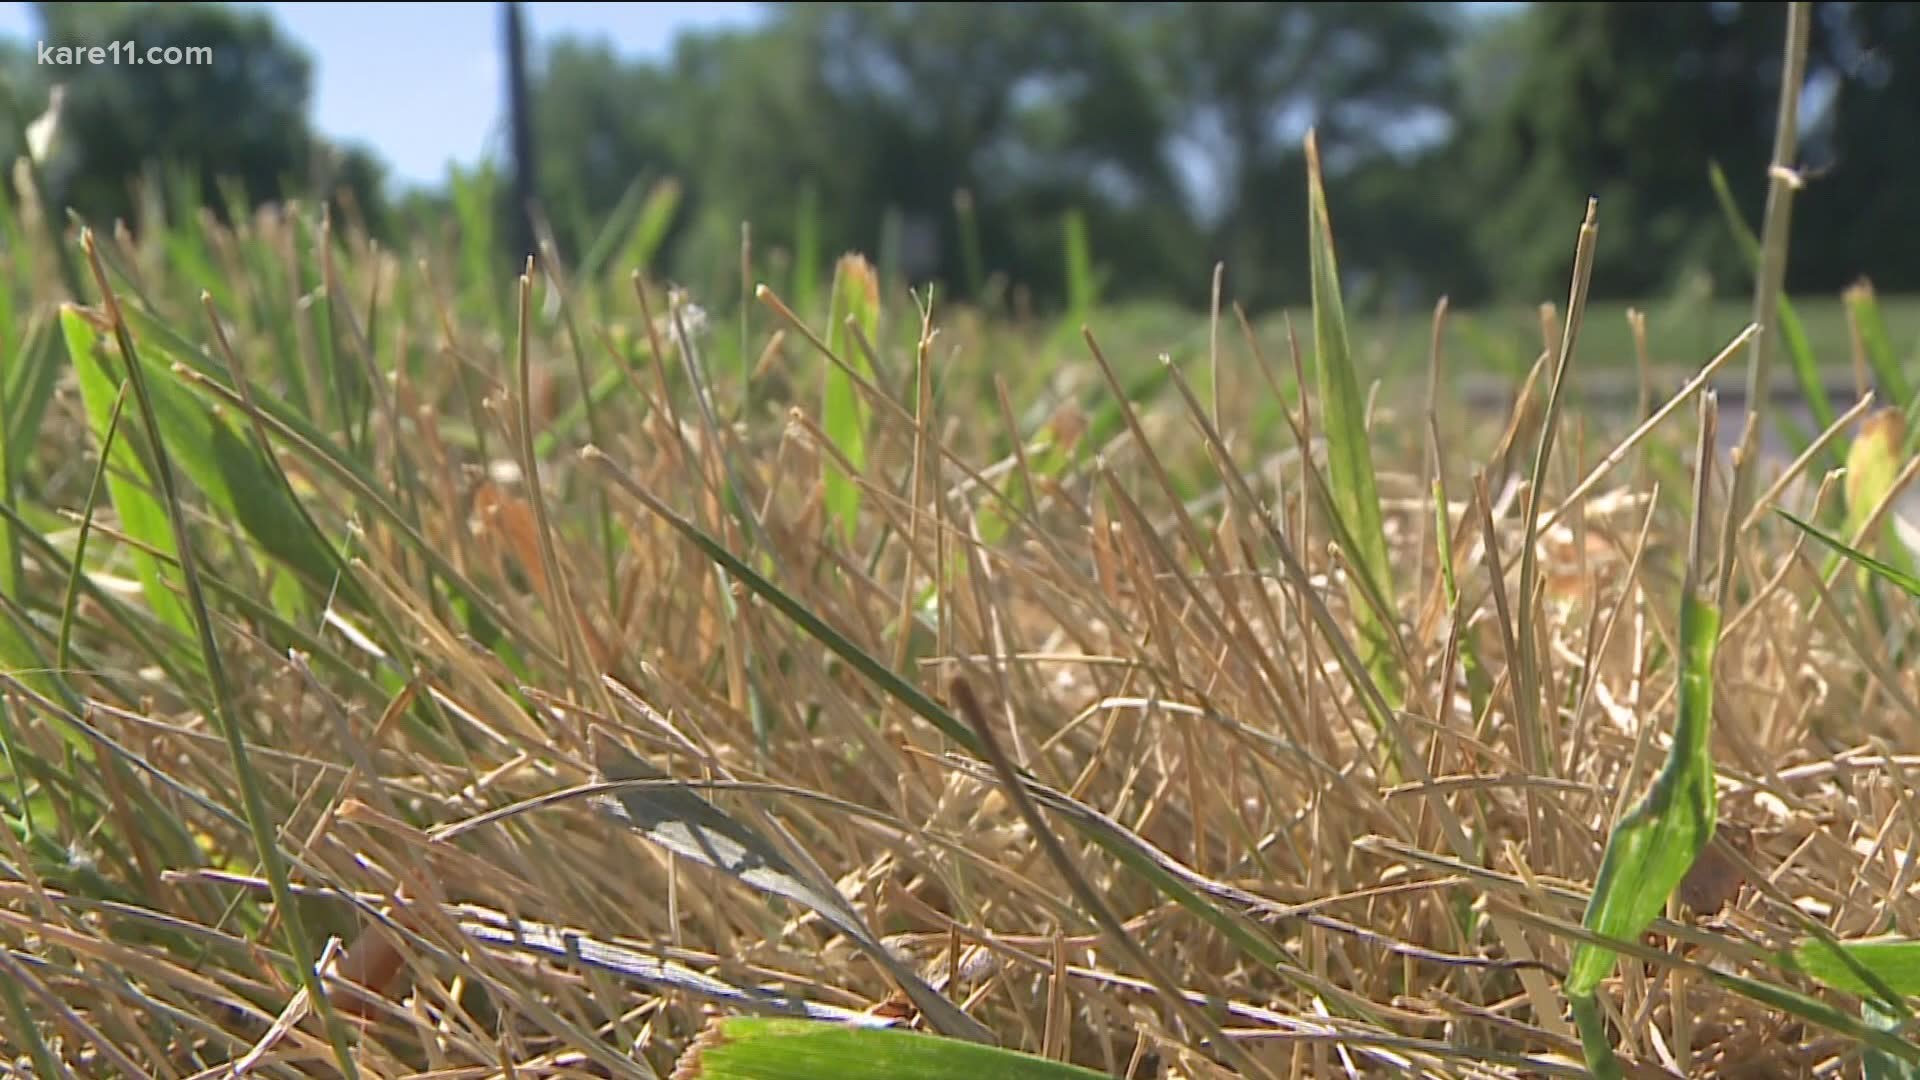 The Minnesota drought is still drying out the state, and many people are being asked to limit their water usage.